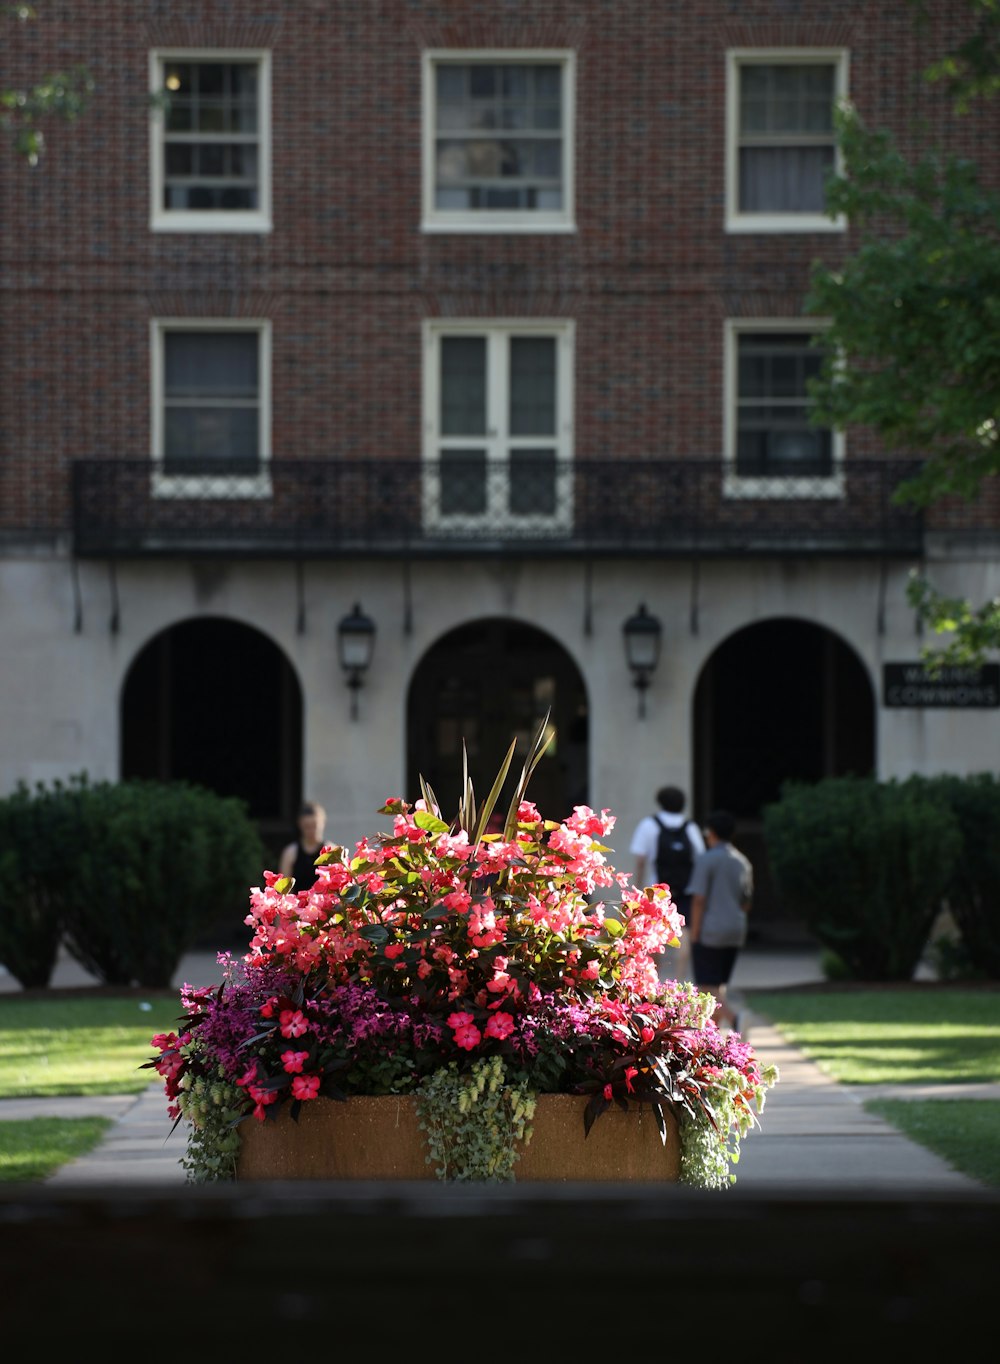 a planter filled with flowers in front of a building